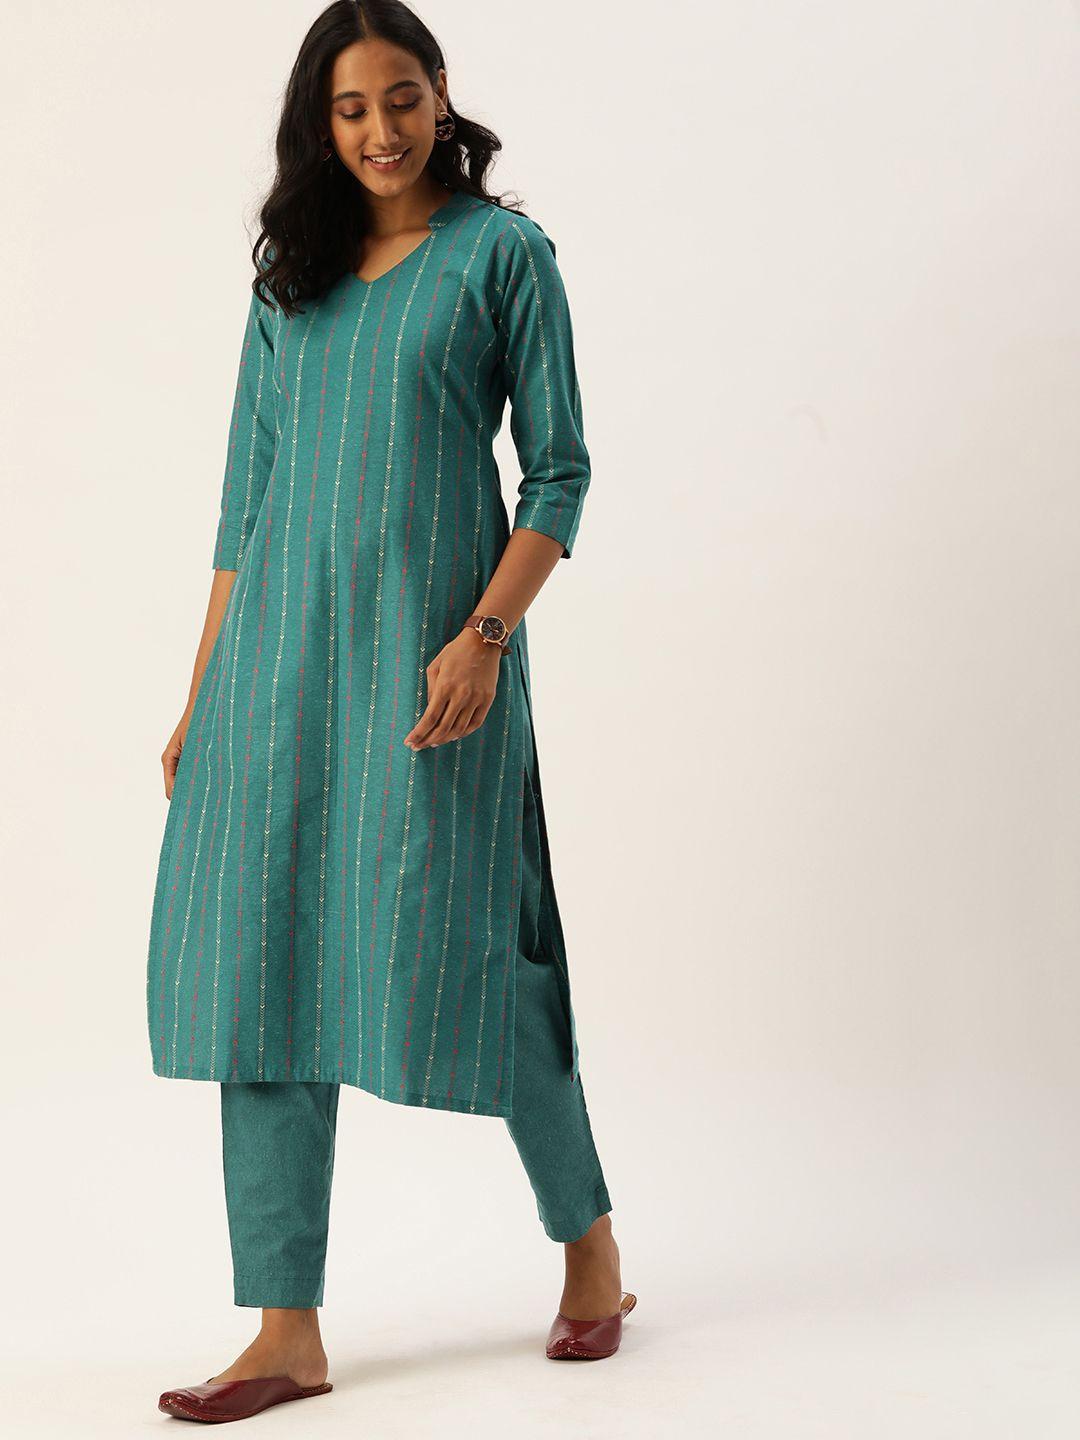 saanjh-women-turquoise-green-cotton-blend-woven-designed-kurti-with-trousers